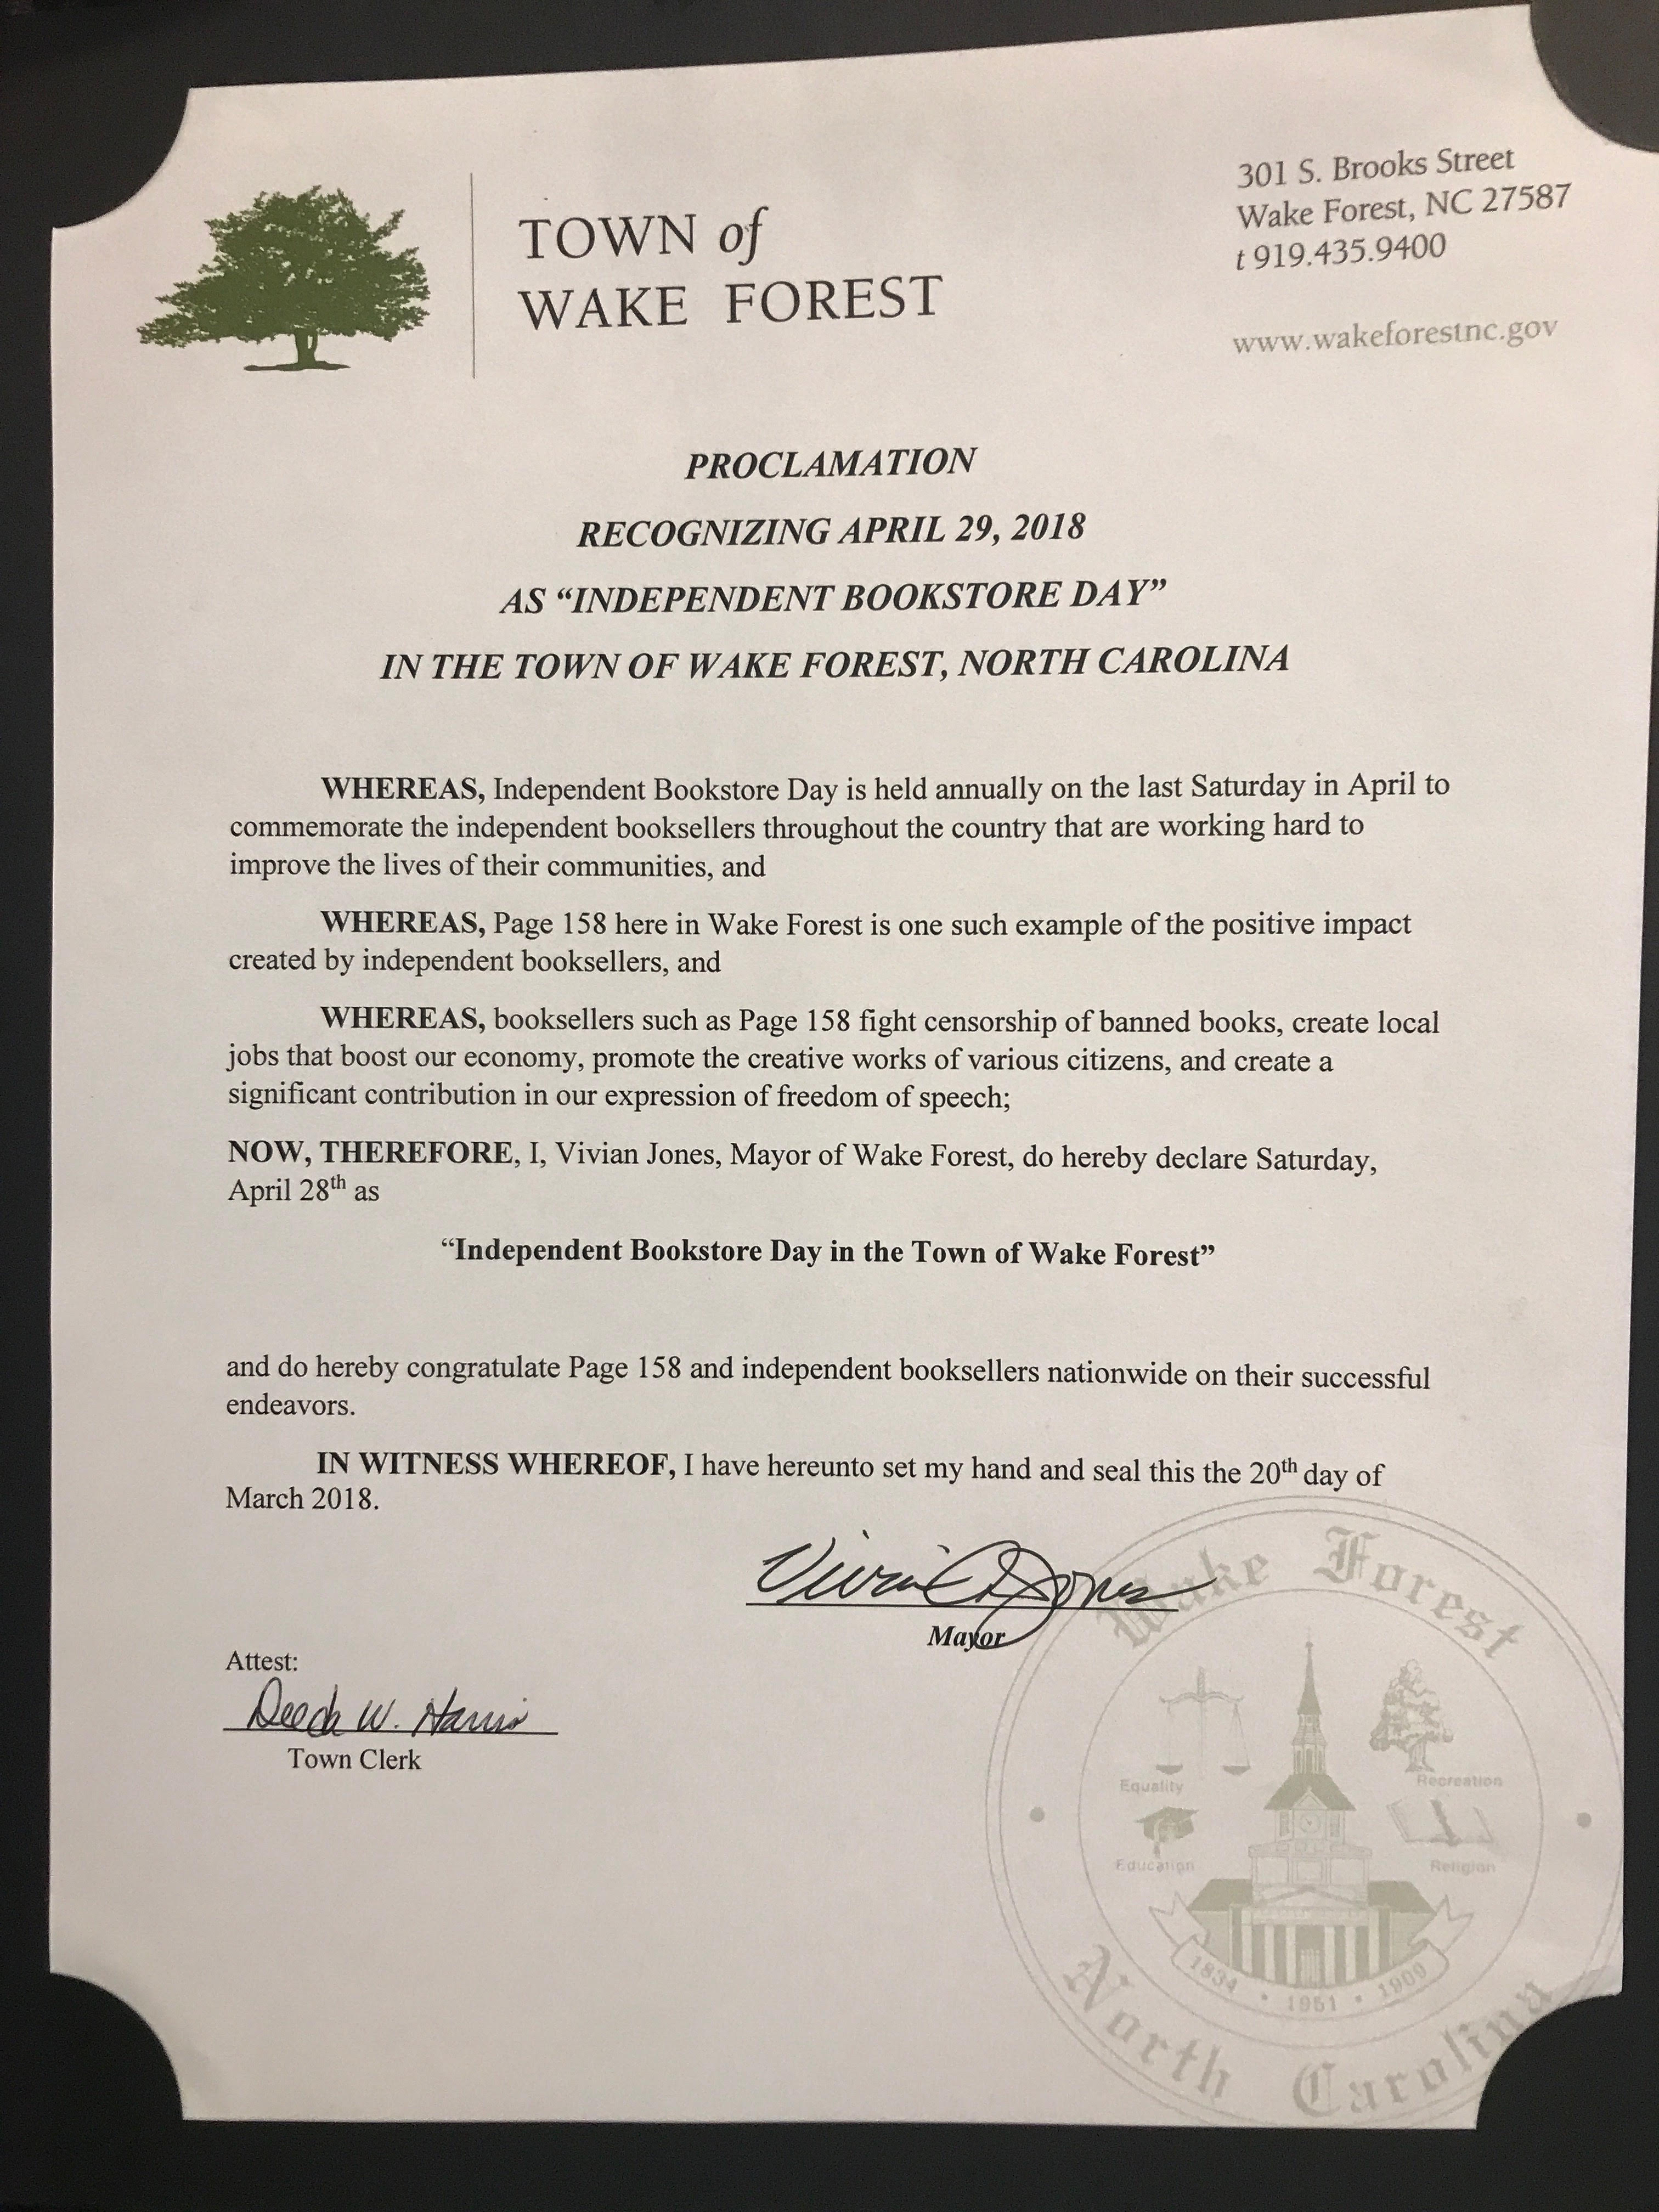 Wake Forest, North Carolina mayor Vivian Jones' proclamation for Independent Bookstore Day